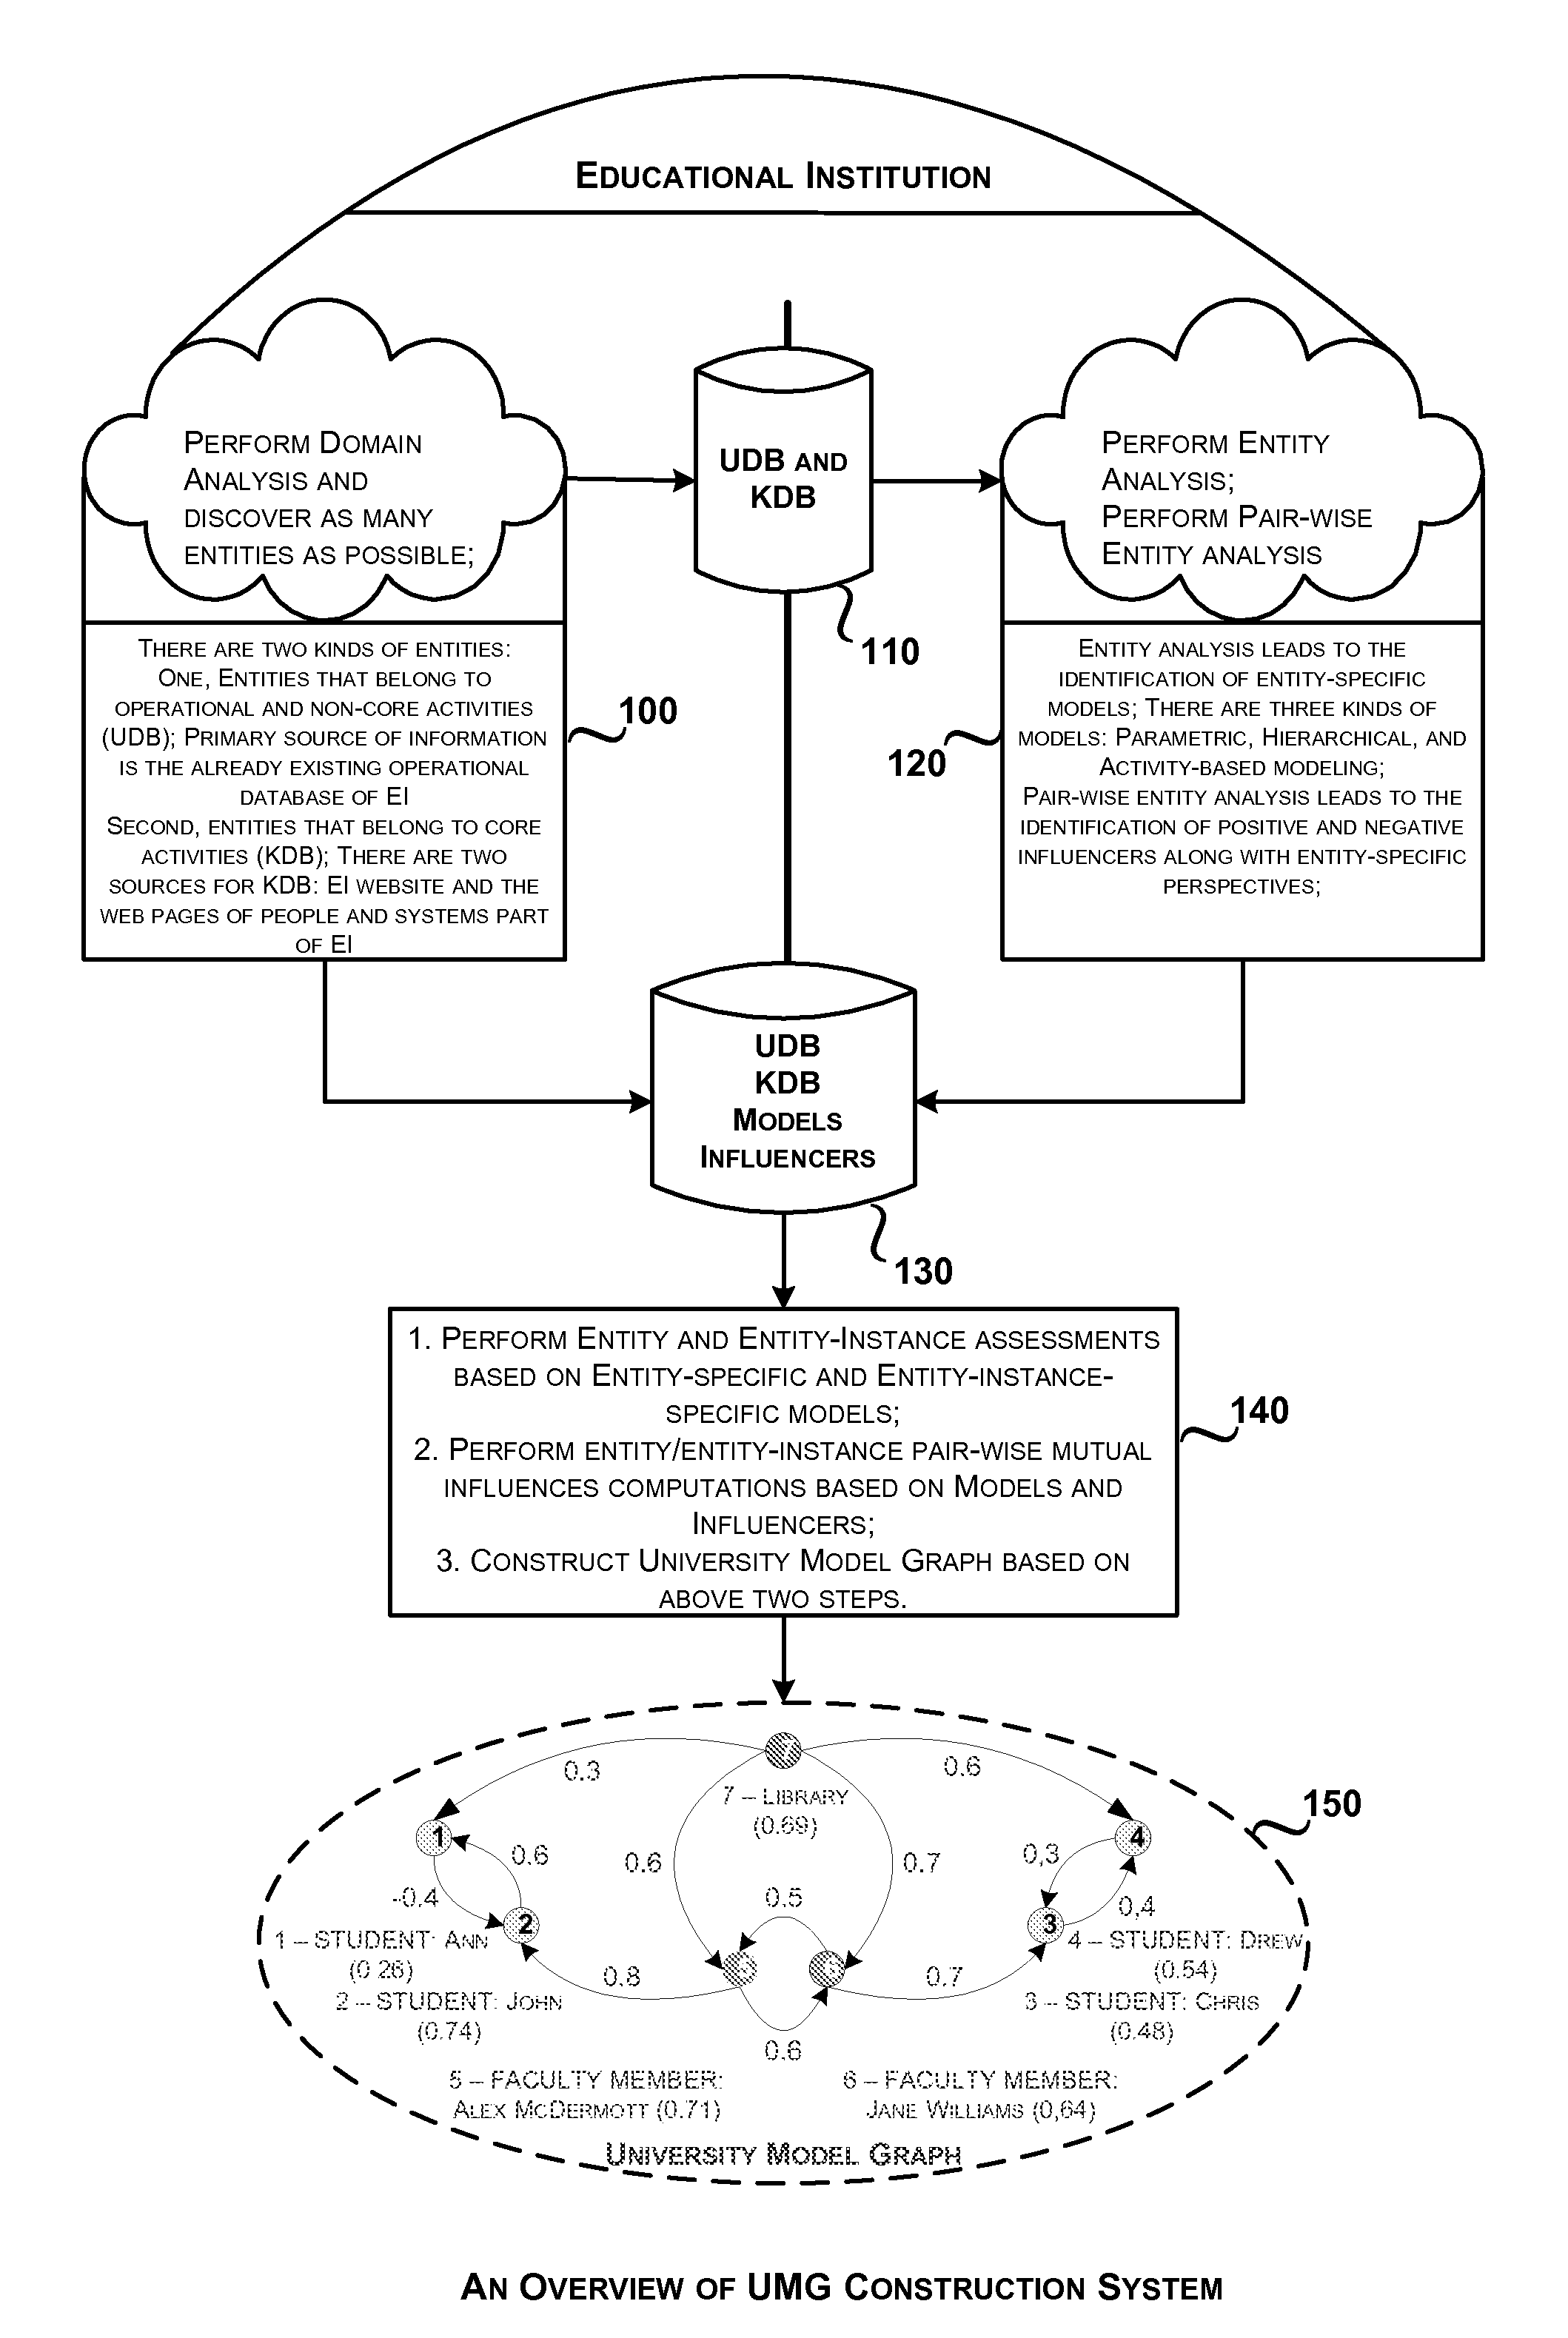 System and method for constructing a university model graph